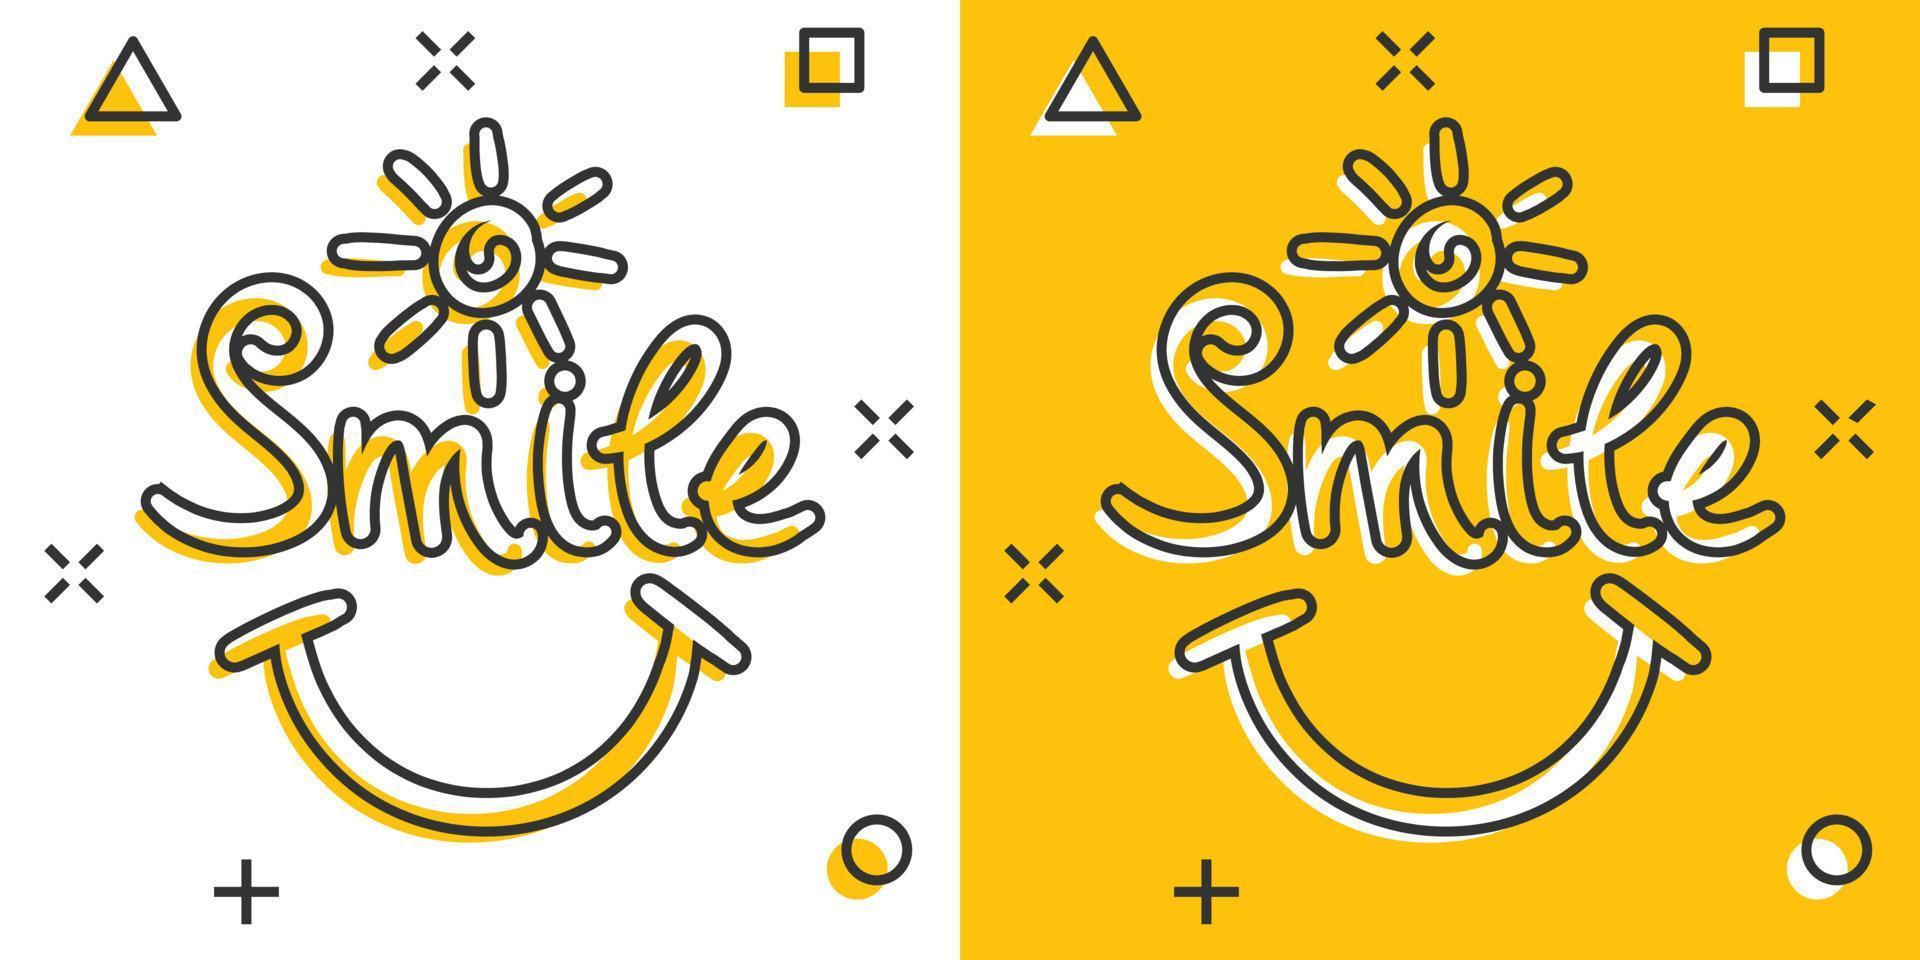 Vector cartoon smile text icon in comic style. Hand drawn smile sign illustration pictogram. Business splash effect concept.